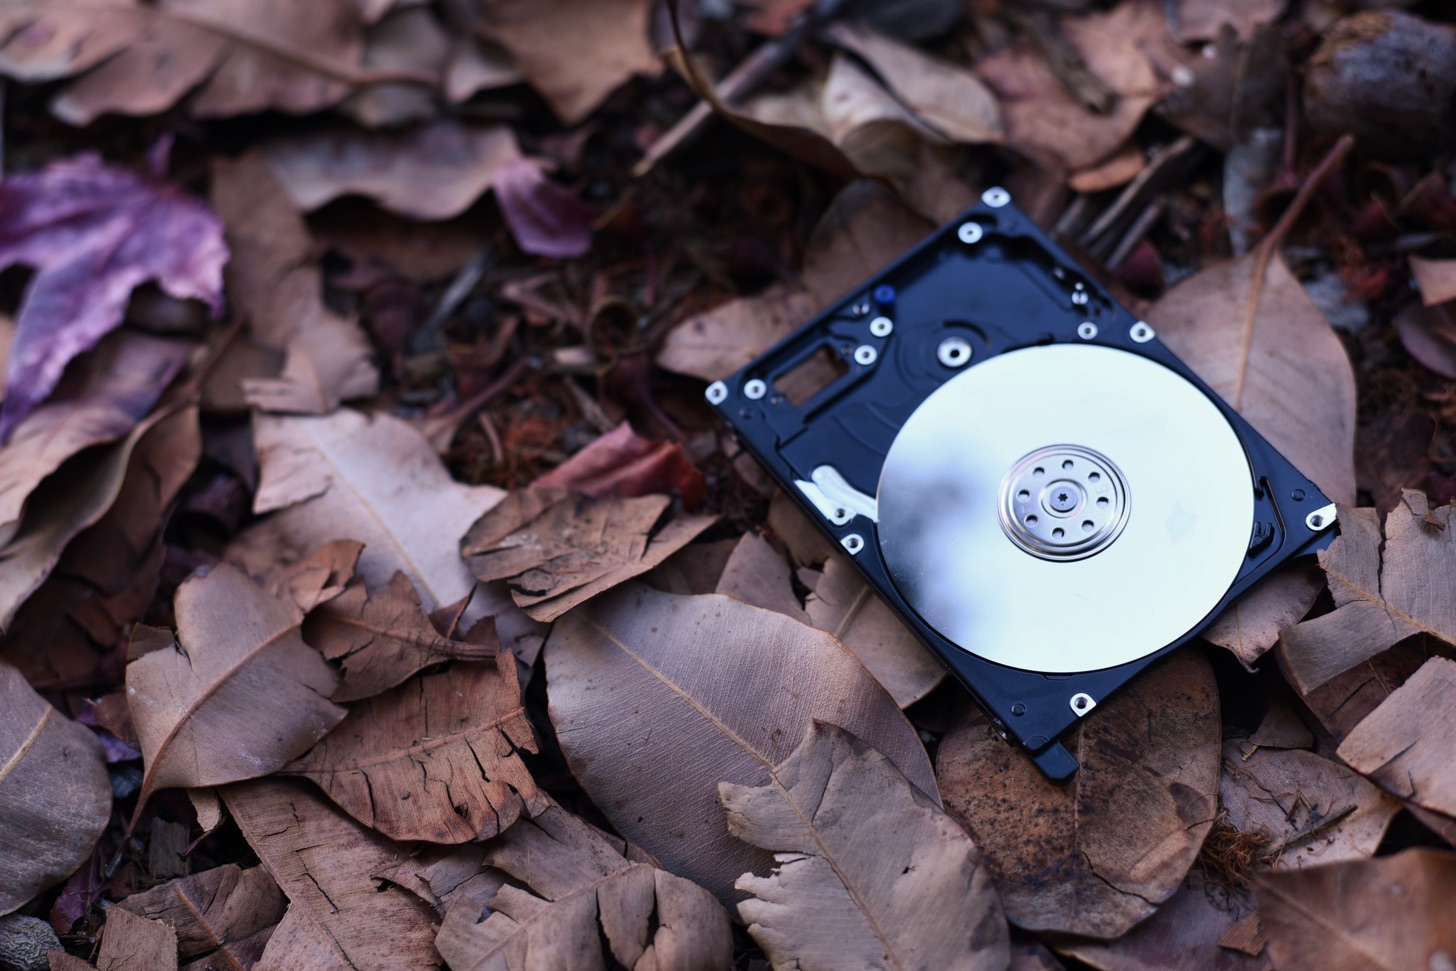 A hard disk lying on some leaves.